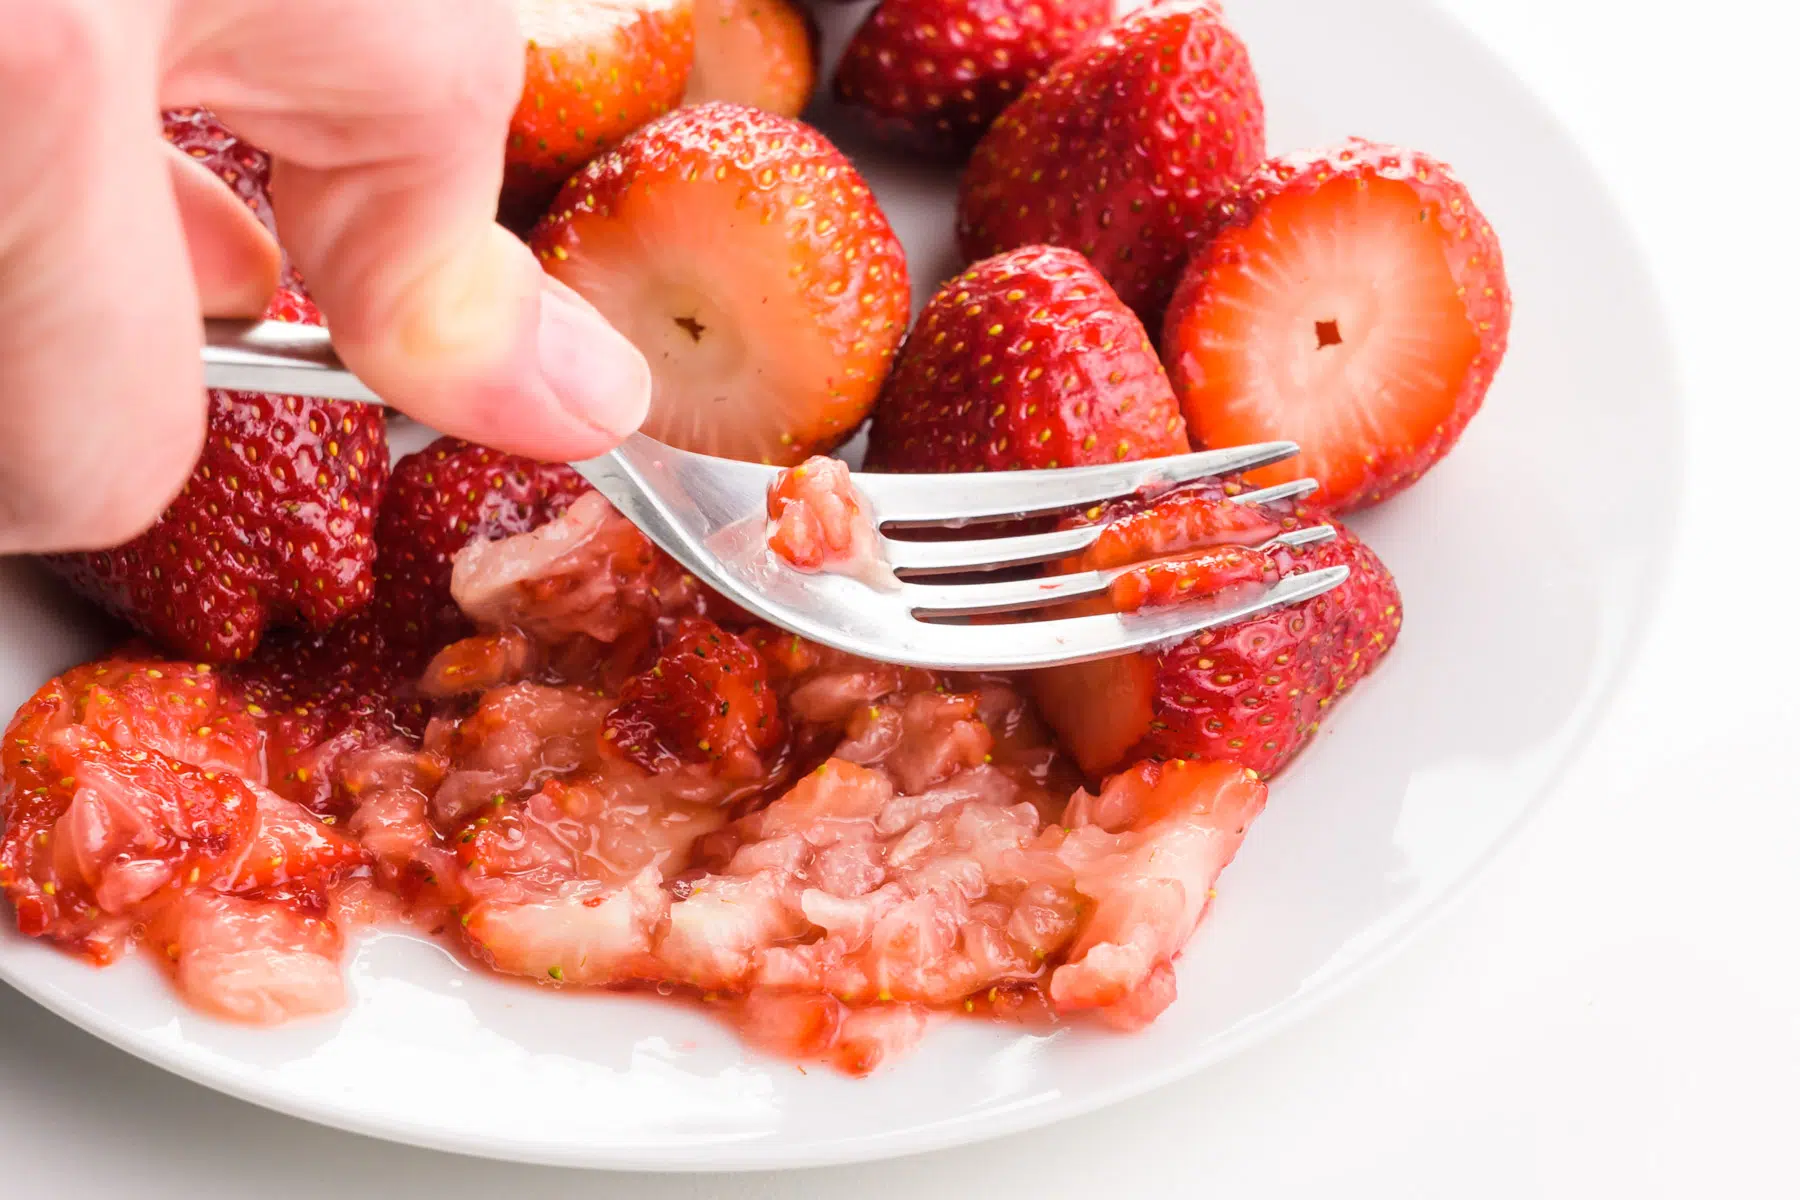 A hand holds a fork using it to mash fresh strawberries.